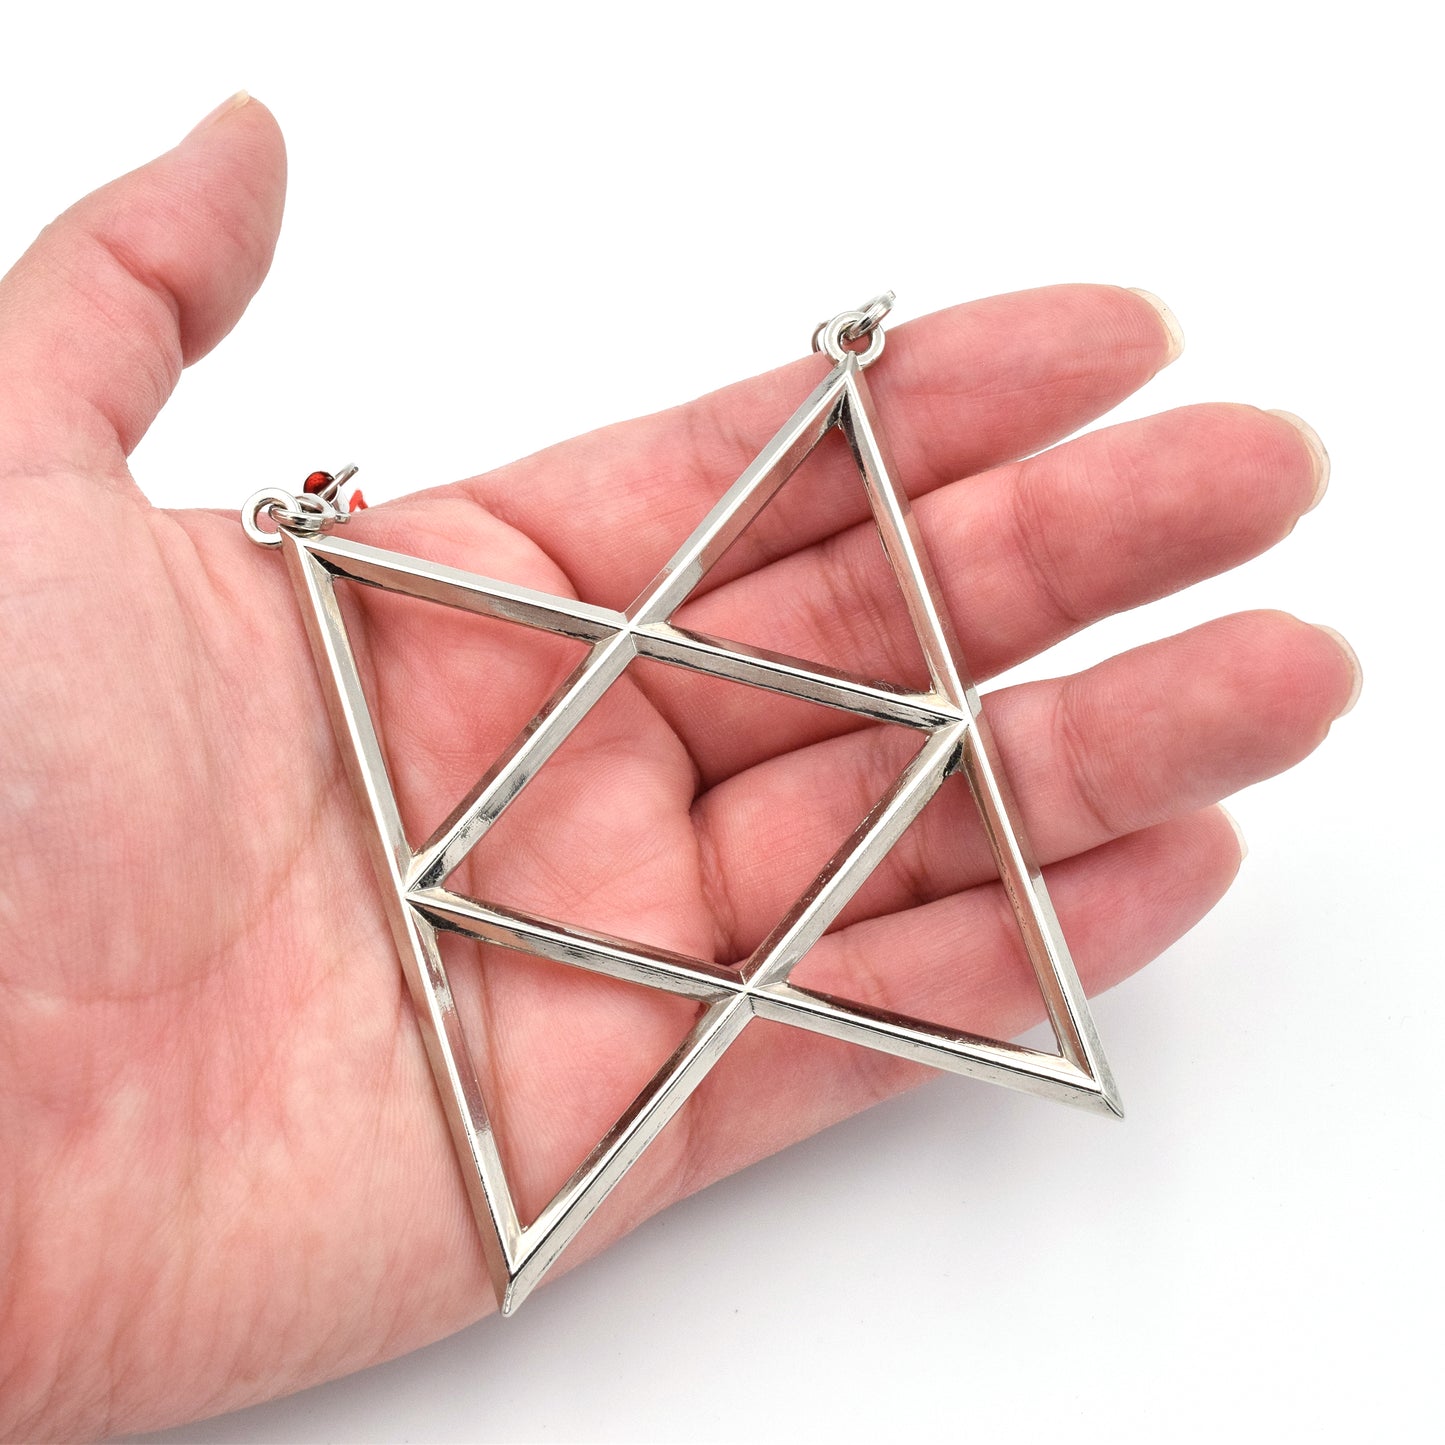 A silver metal ornament is the shape of the BoB symbol. The hanger is a red thread that strings across the top two points.